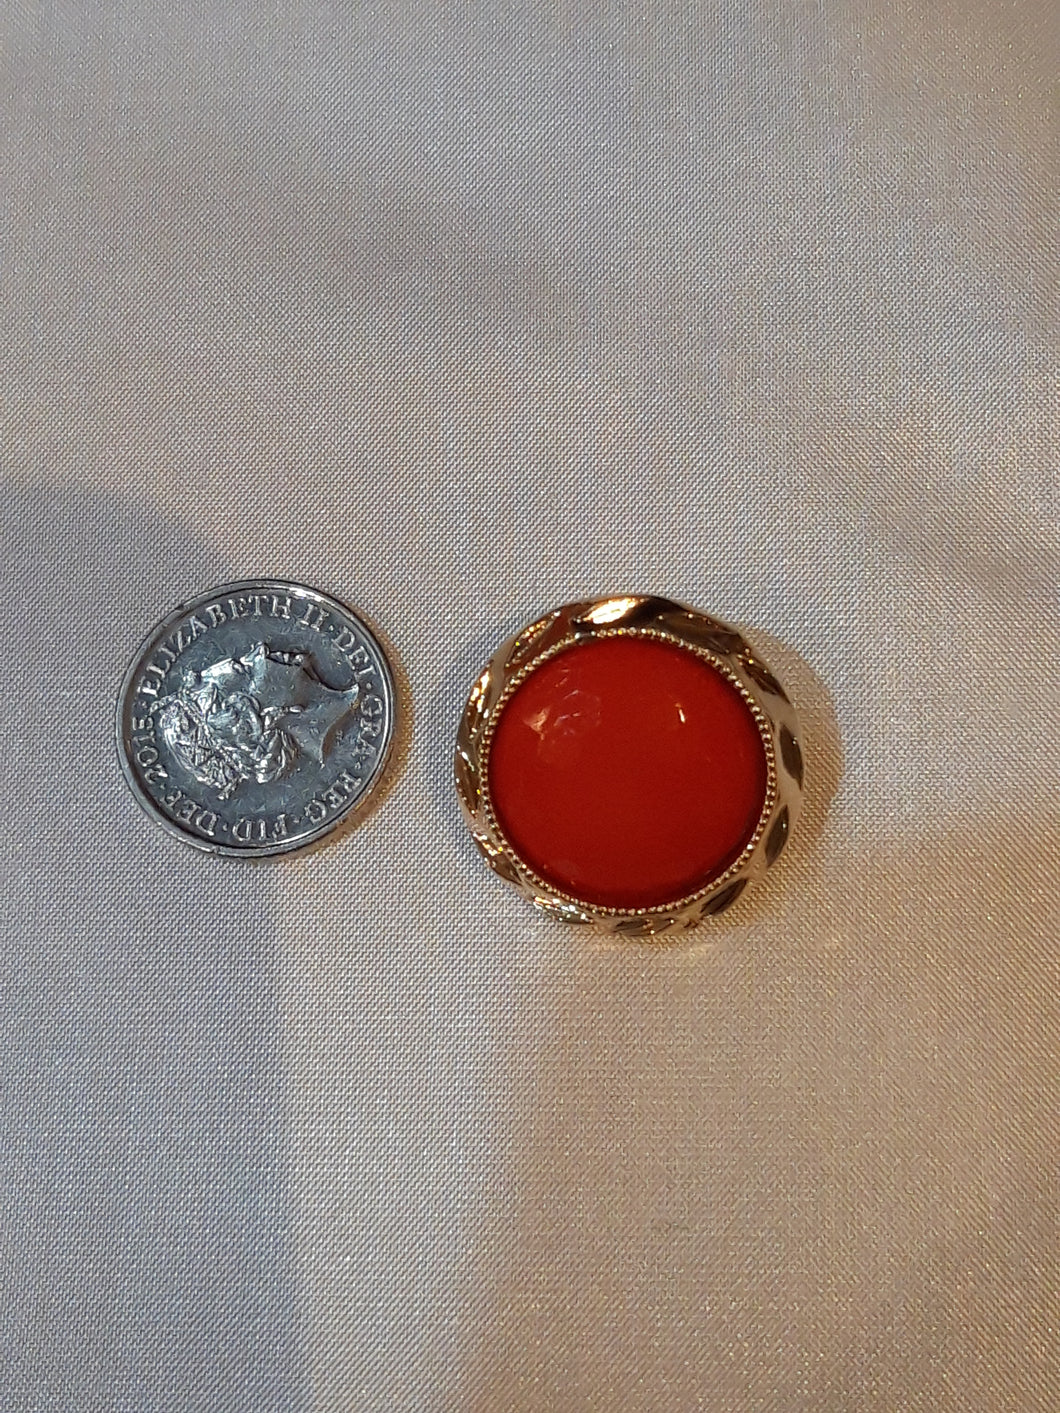 Red Shank Button with a Gold Edge